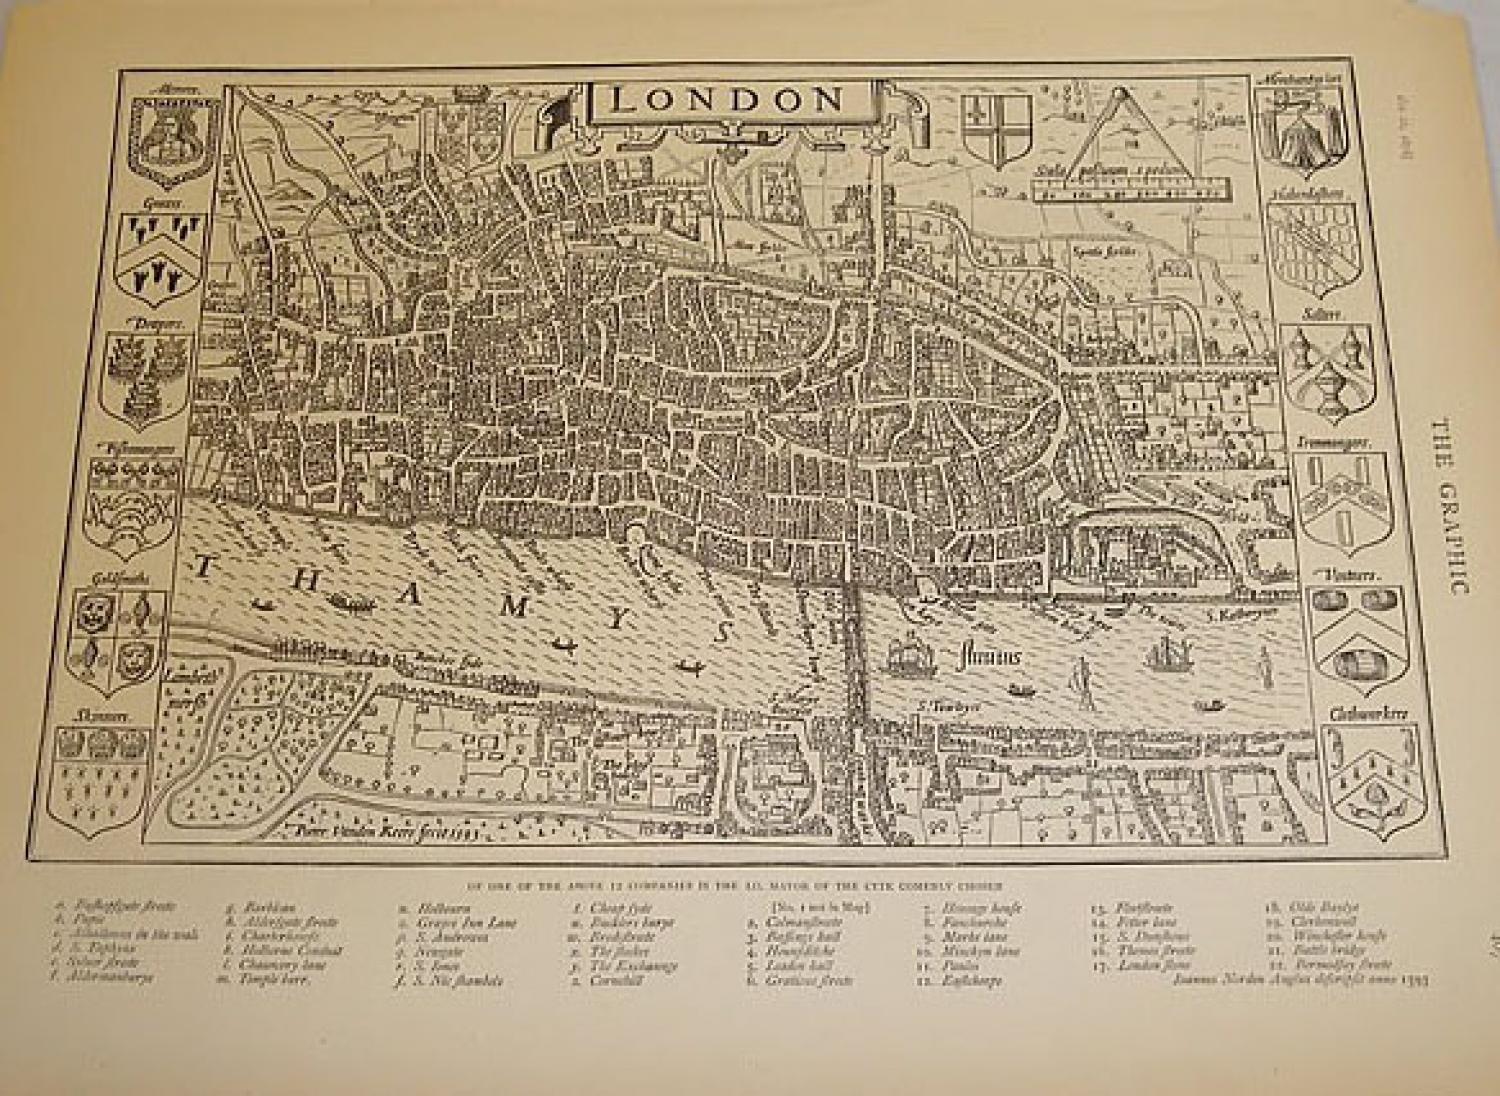 The Graphic - London in 1593